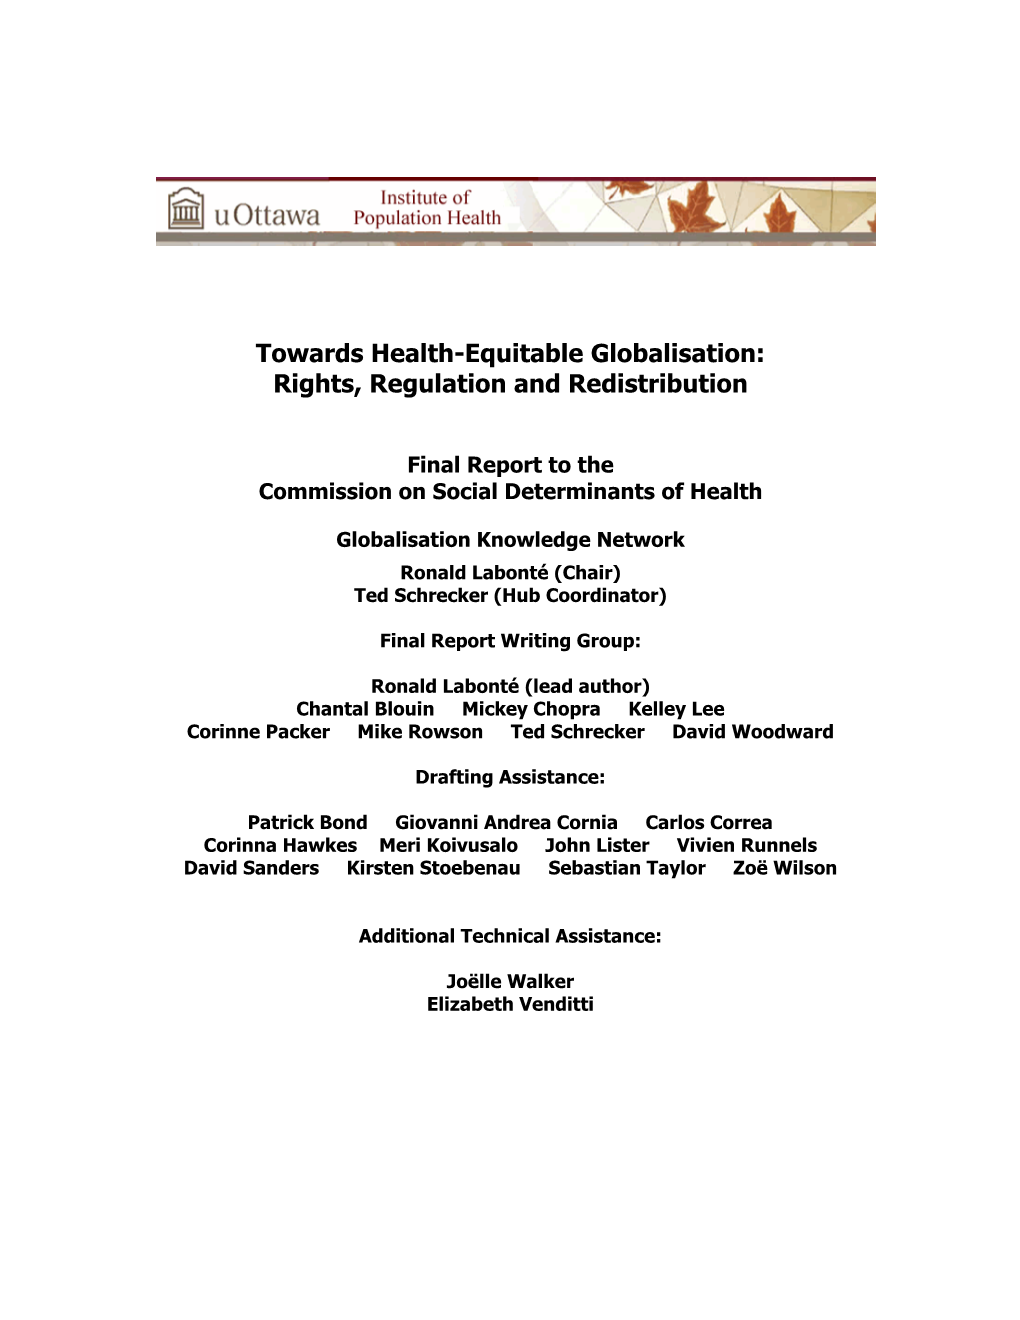 Towards Health-Equitable Globalisation: Rights, Regulation and Redistribution